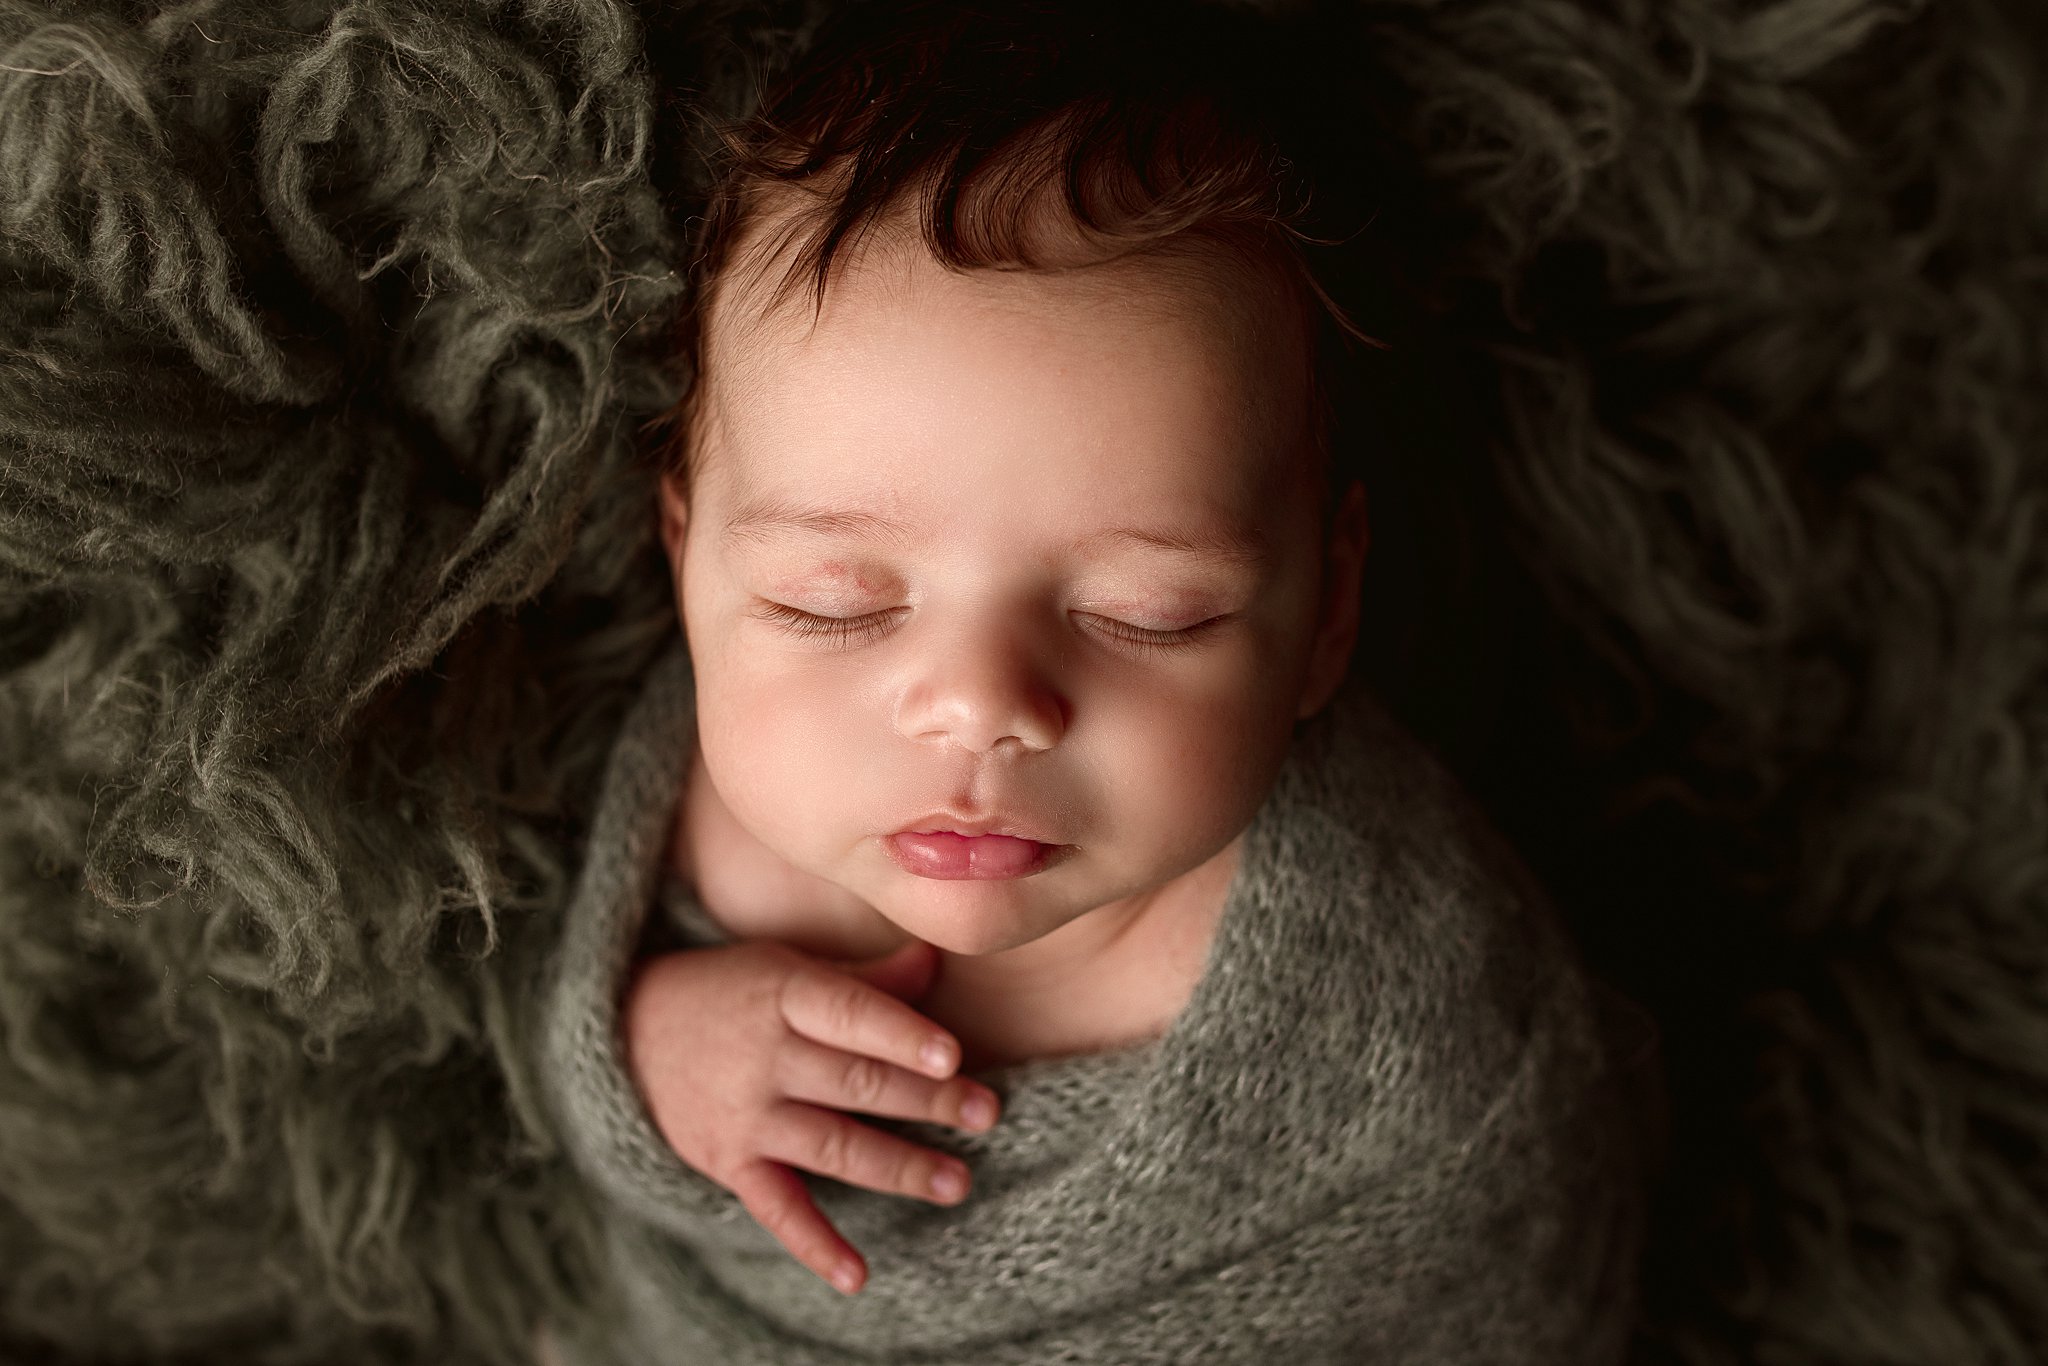 A newborn baby sleeps with one hand out of its swaddle on a furry blanket best pediatrician toronoto